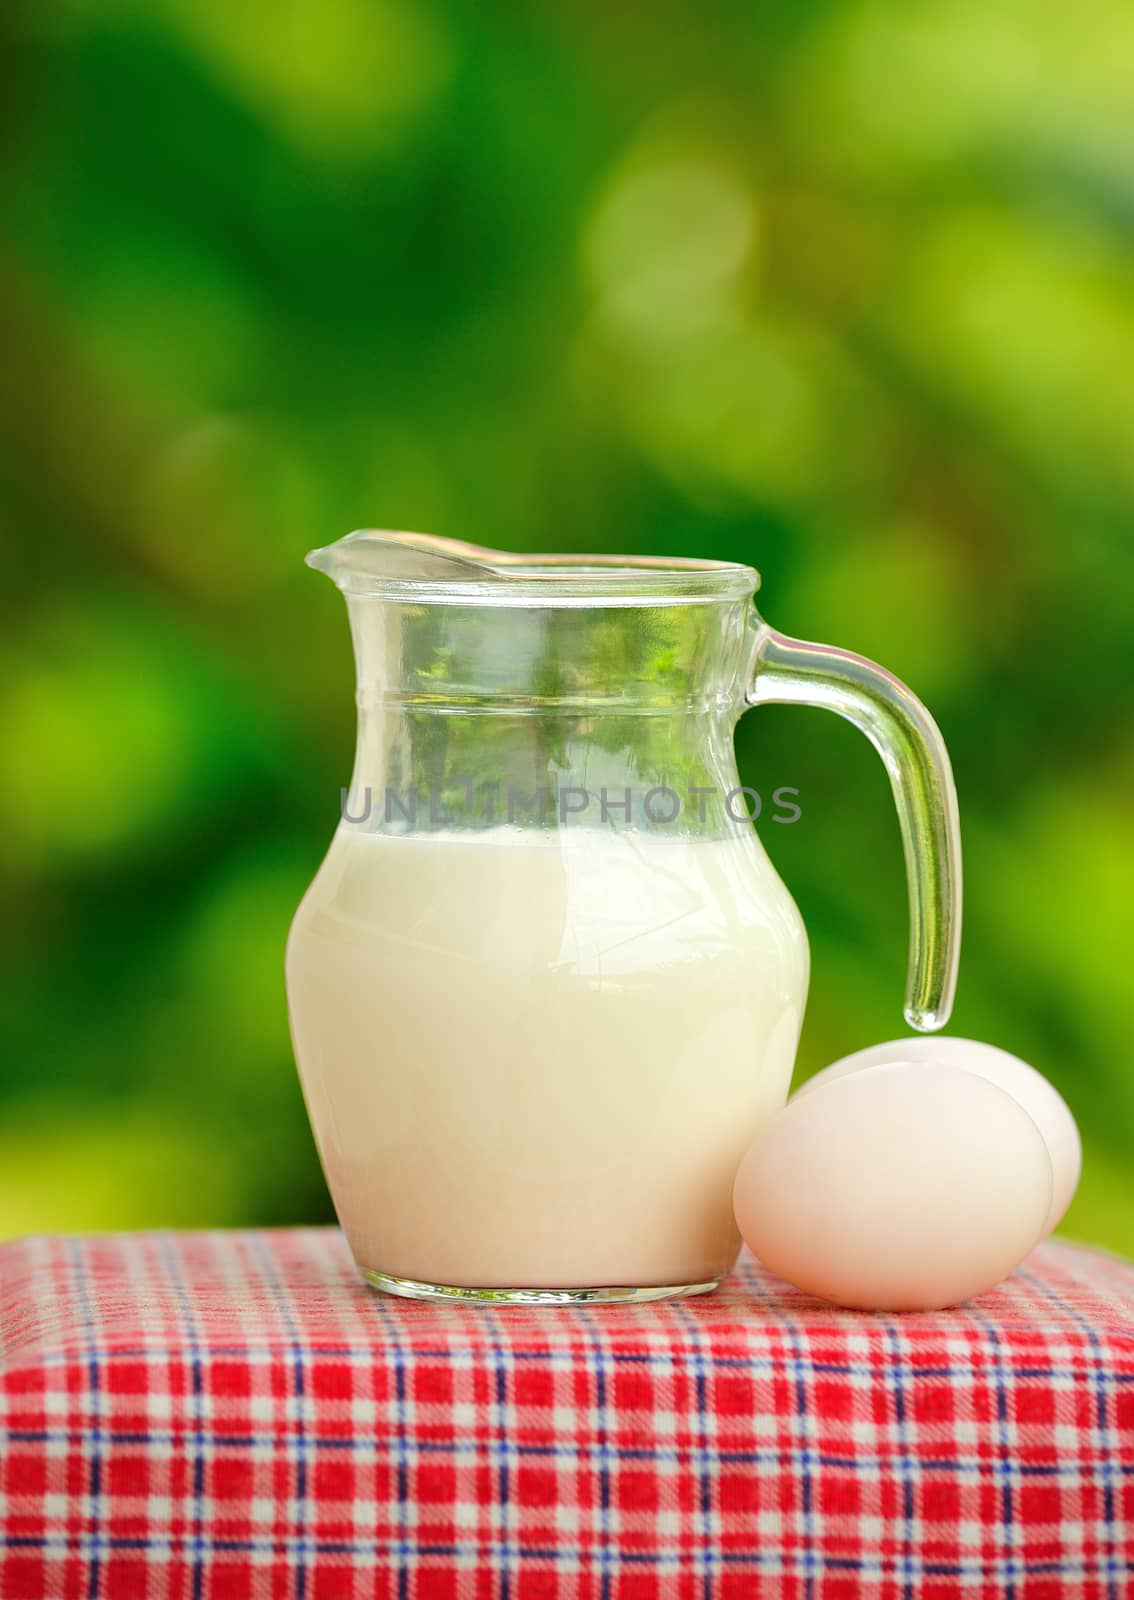 Pitcher of milk and eggs in the garden.